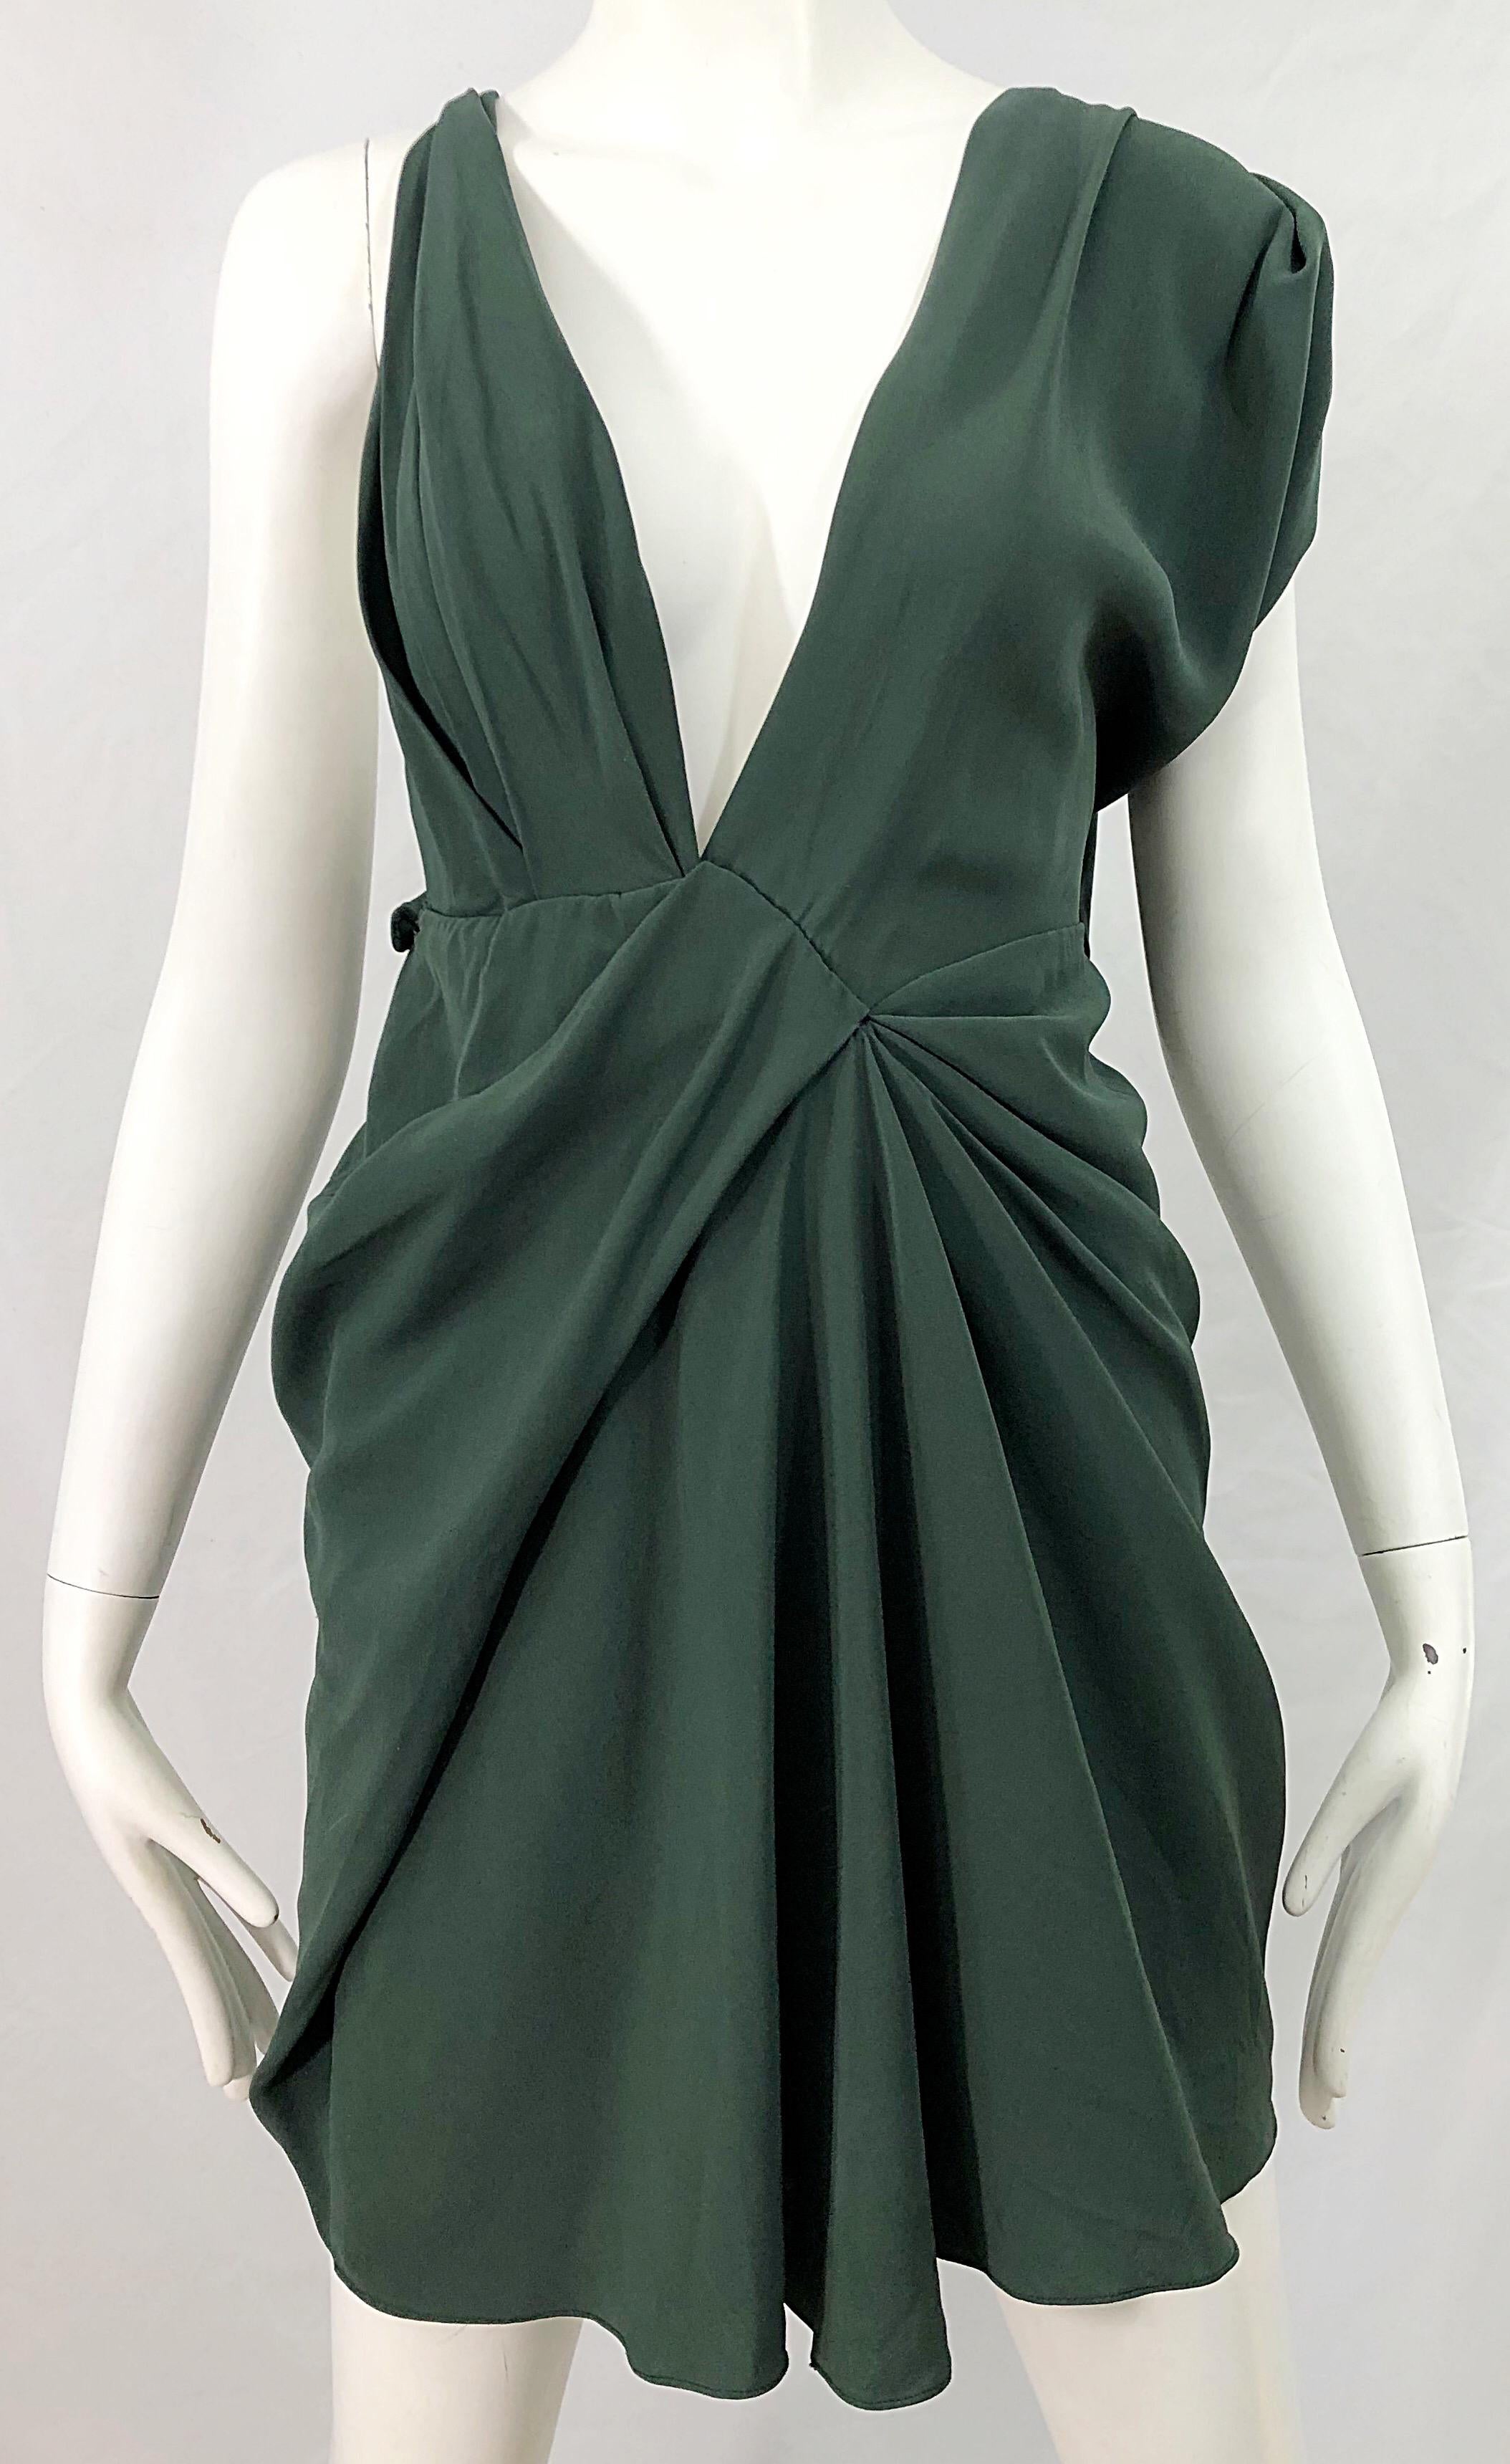 J Mendel Hunter Forest Green Sexy Plunging Early 2000s Asymmetrical Mini Dress In Excellent Condition For Sale In San Diego, CA